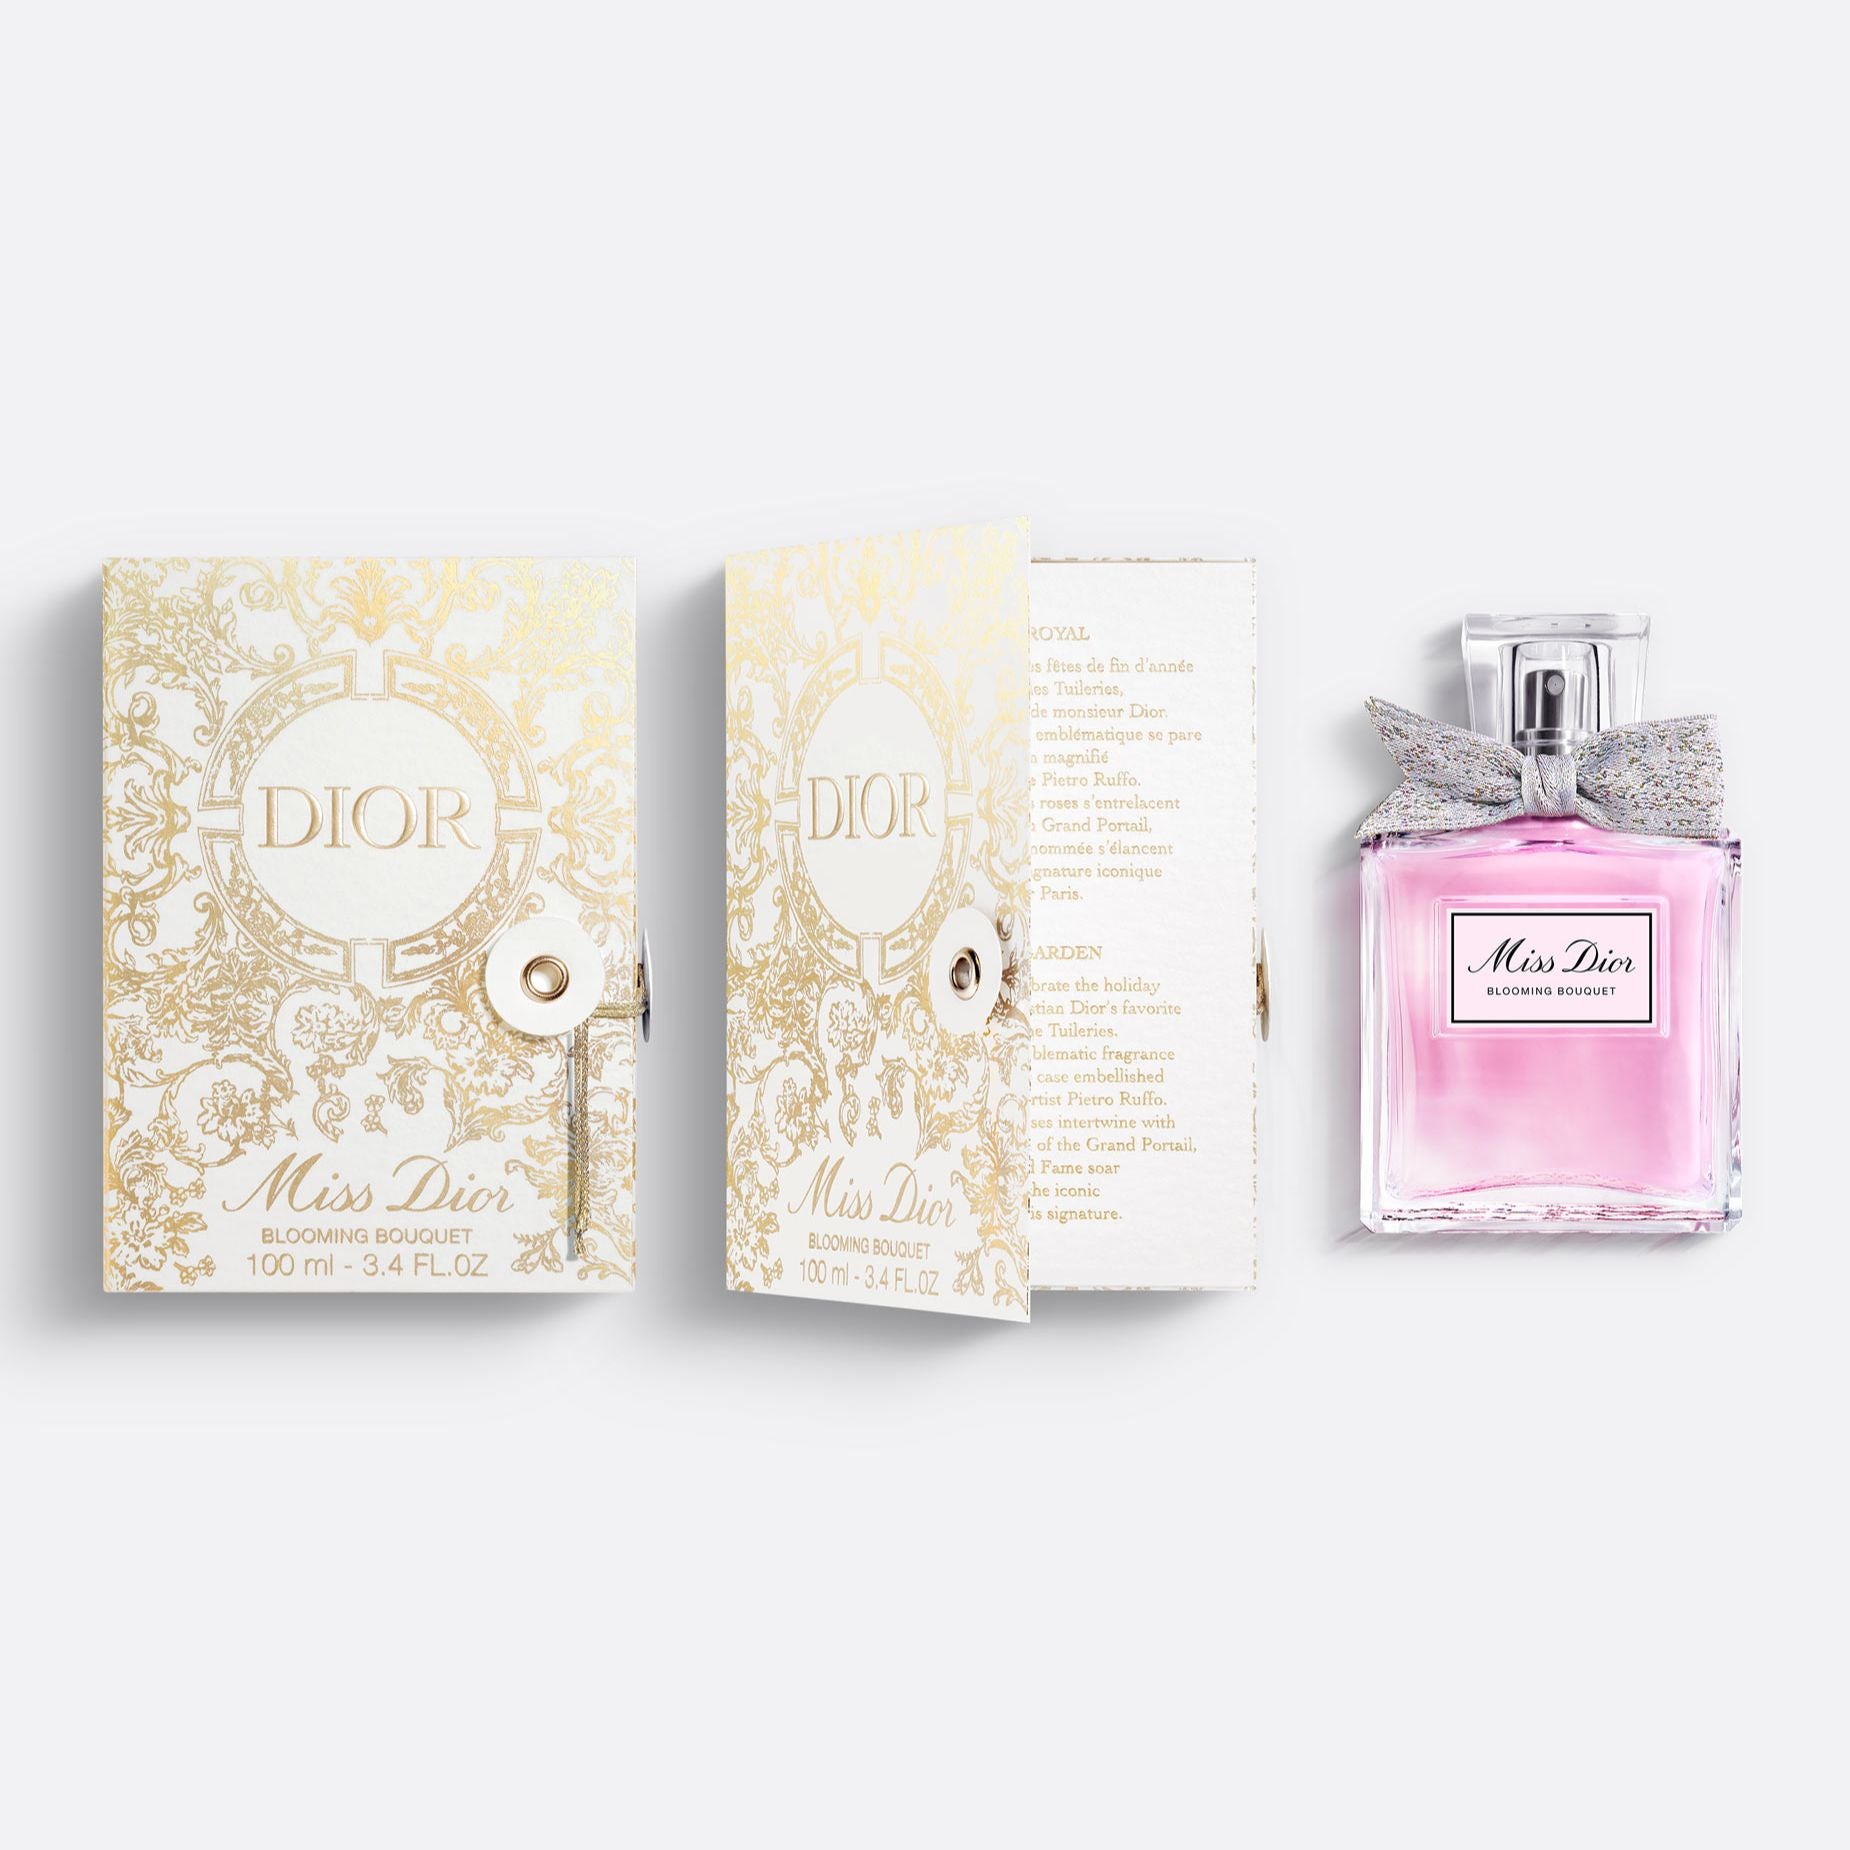 MISS DIOR BLOOMING BOUQUET - LIMITED EDITION ~ Eau de Toilette - Fresh and Tender Notes